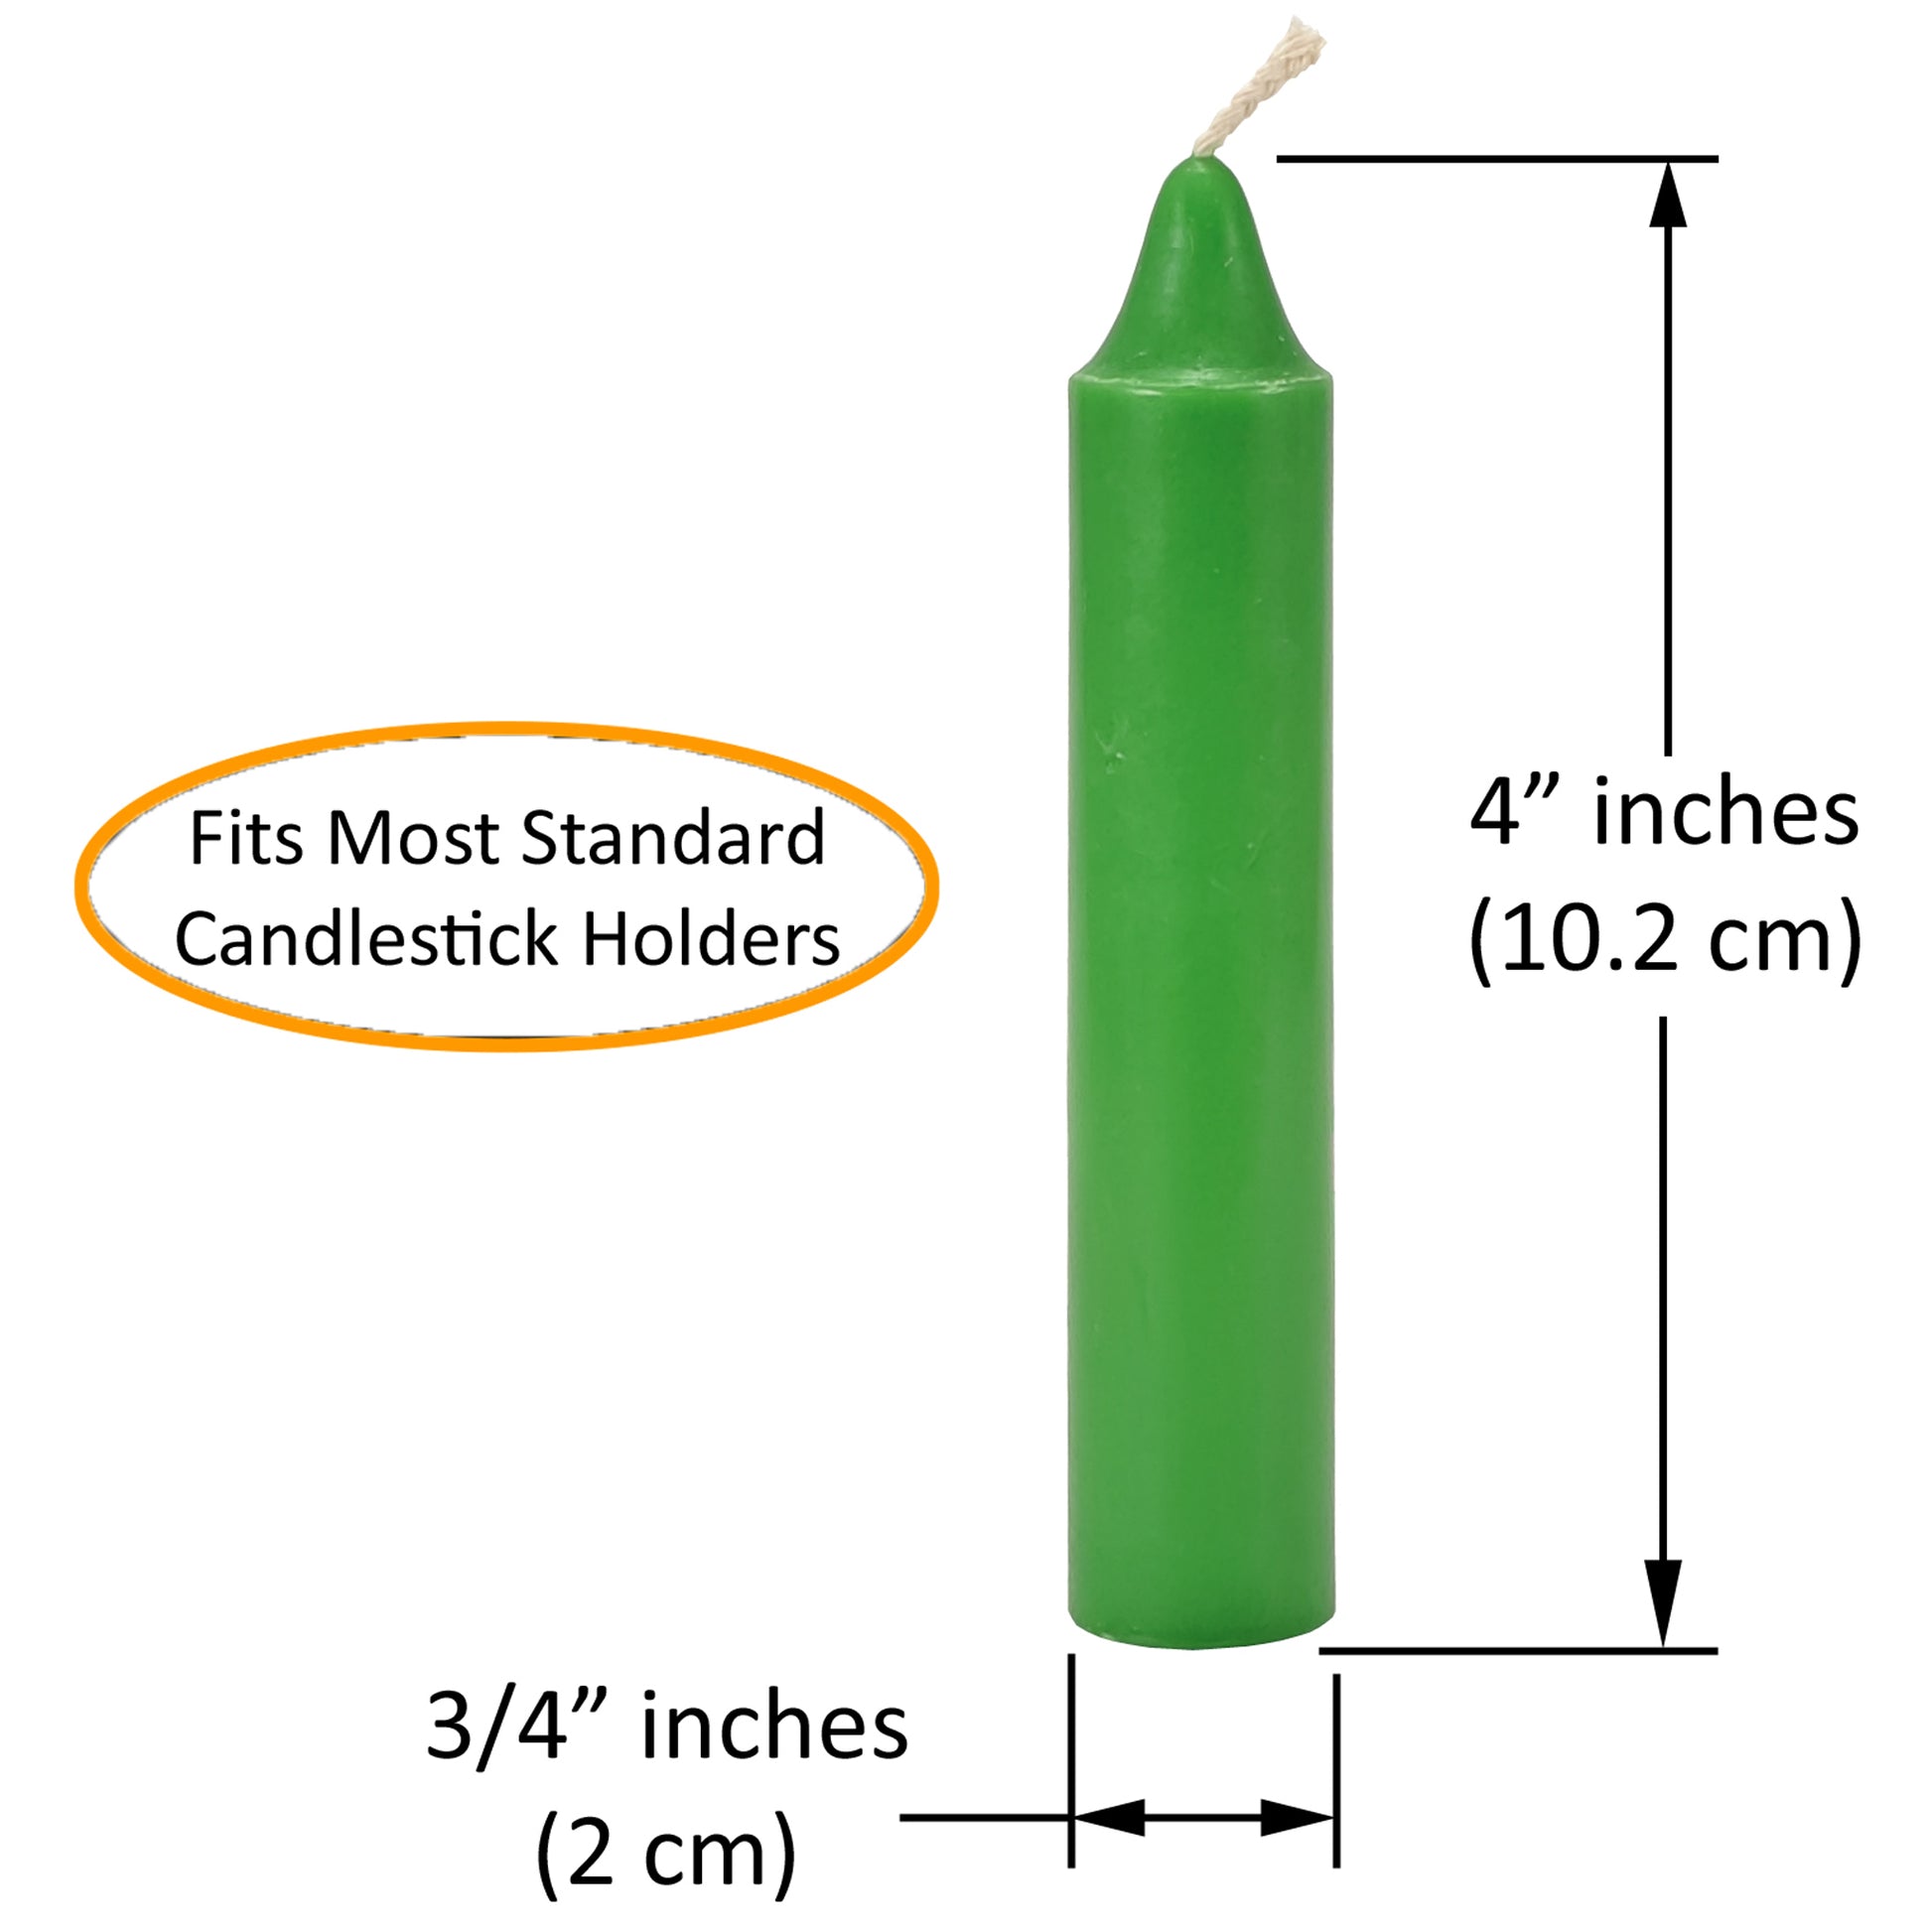 Infographic, candle dimensions, 4 inches tall, .75 inches diameter.